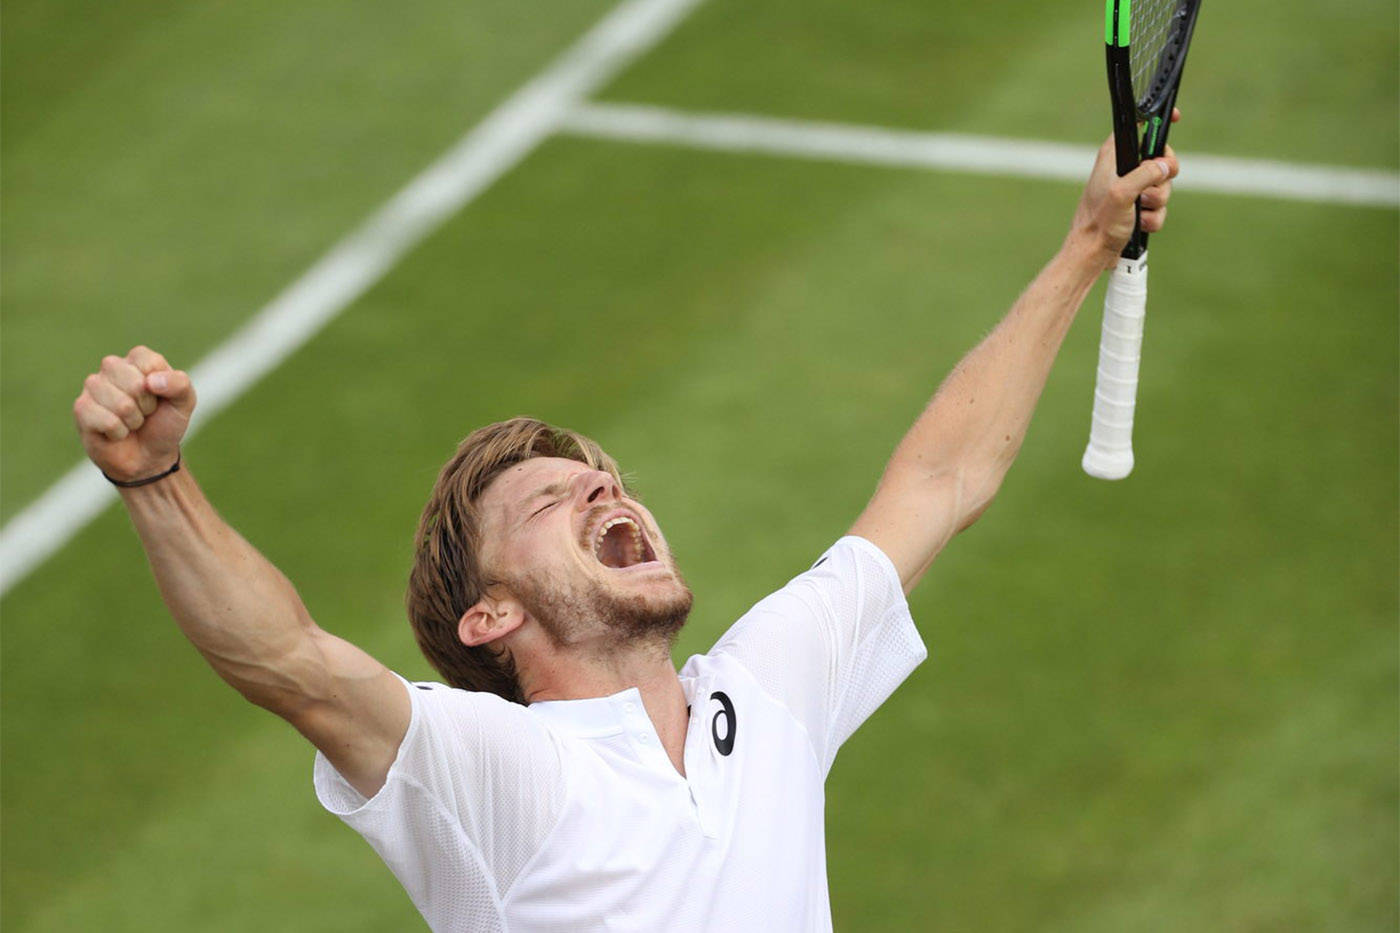 David Goffin Shouting In Happiness Wallpaper